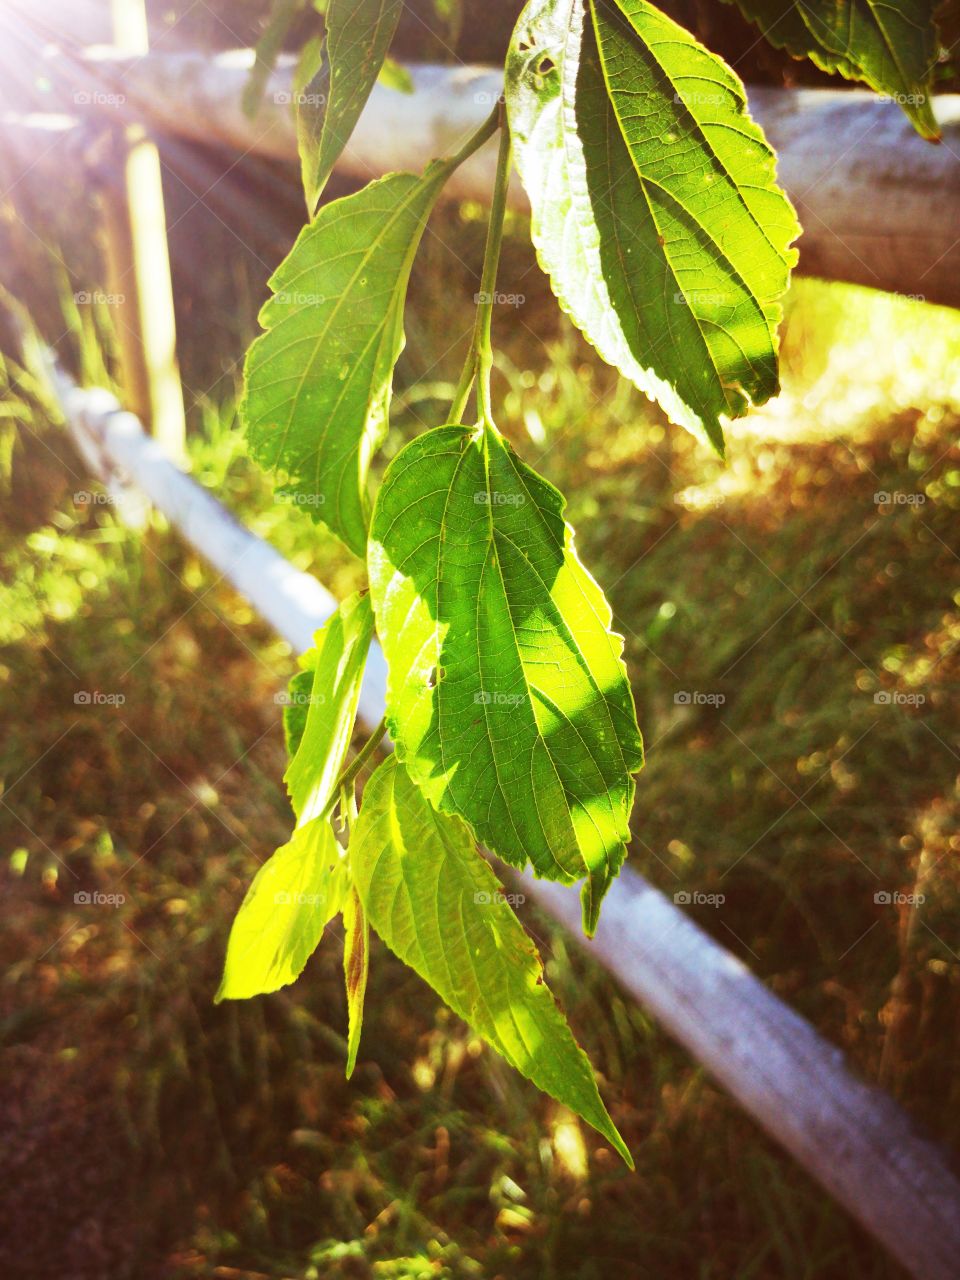 Sunlight and green leaves